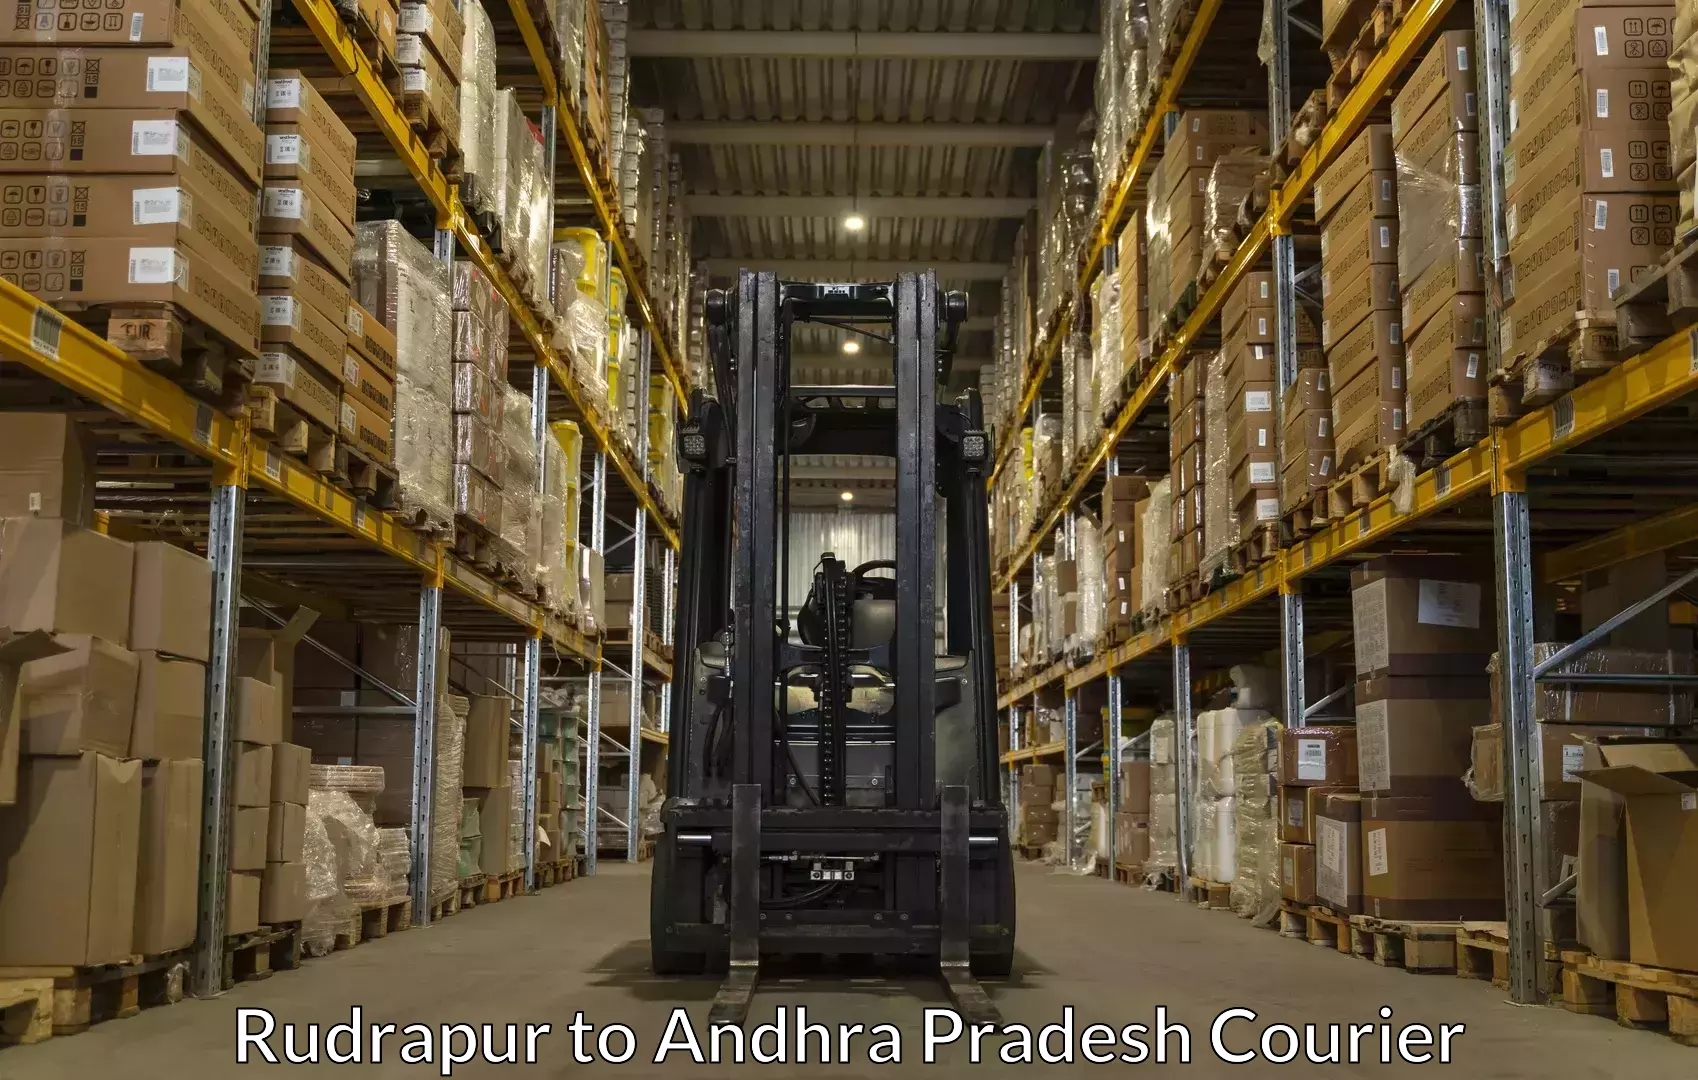 Luggage transport consulting Rudrapur to Samalkot